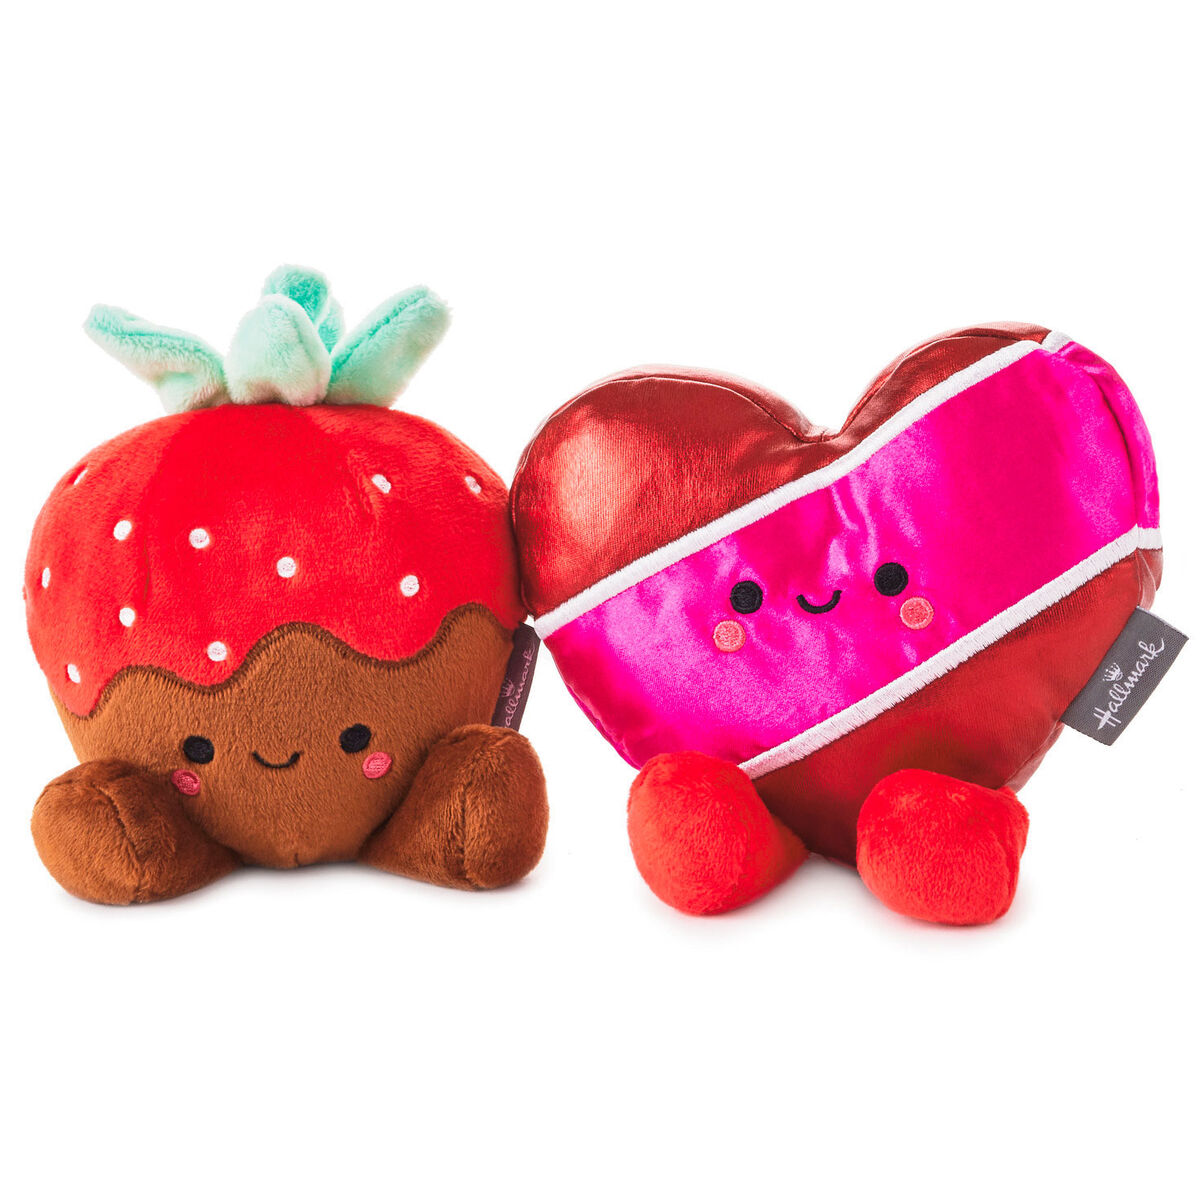 Better Together Valentines Strawberry and Chocolates Magnetic Plush